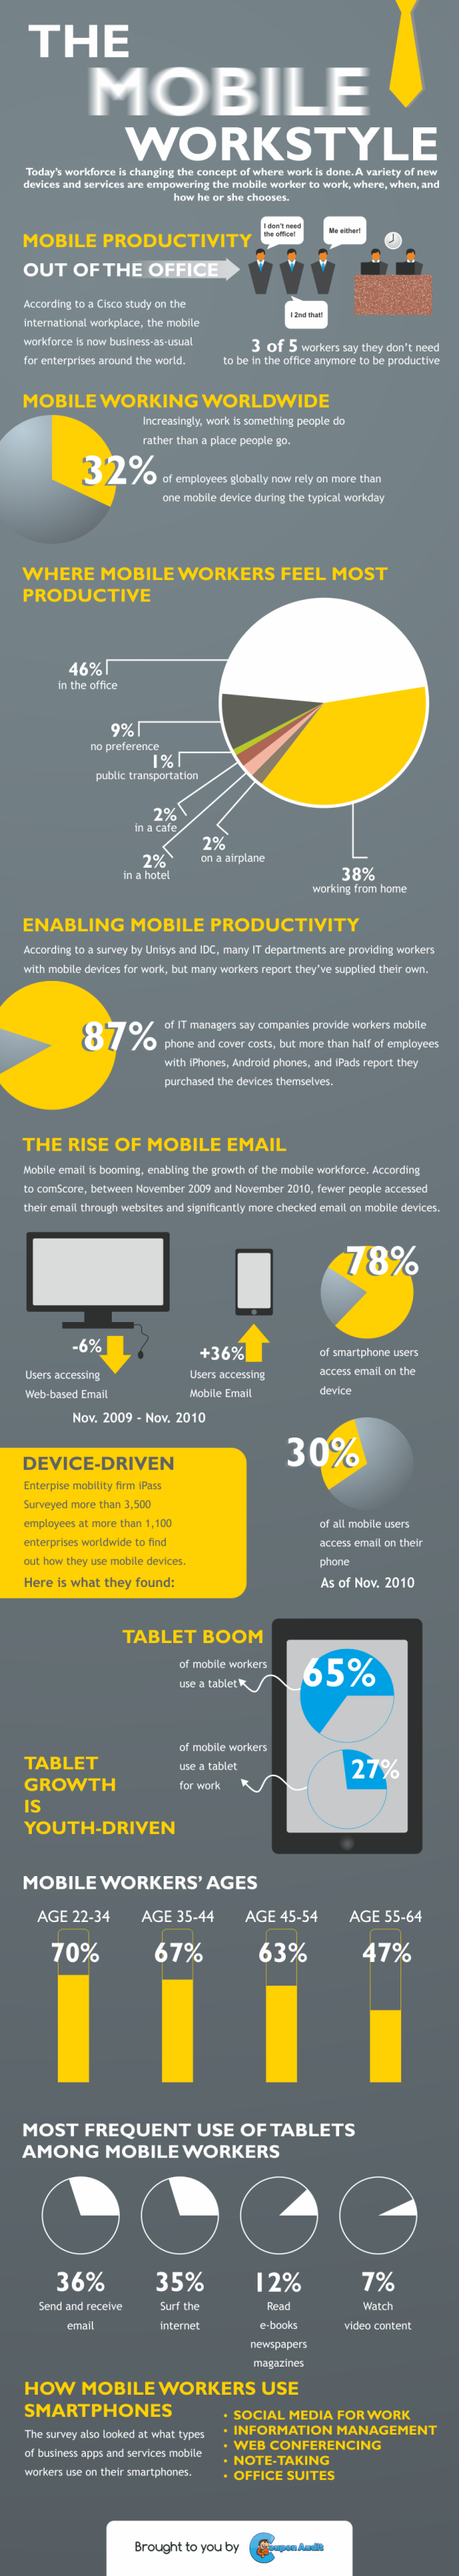 Inforgraphic - The Mobile Workstyle